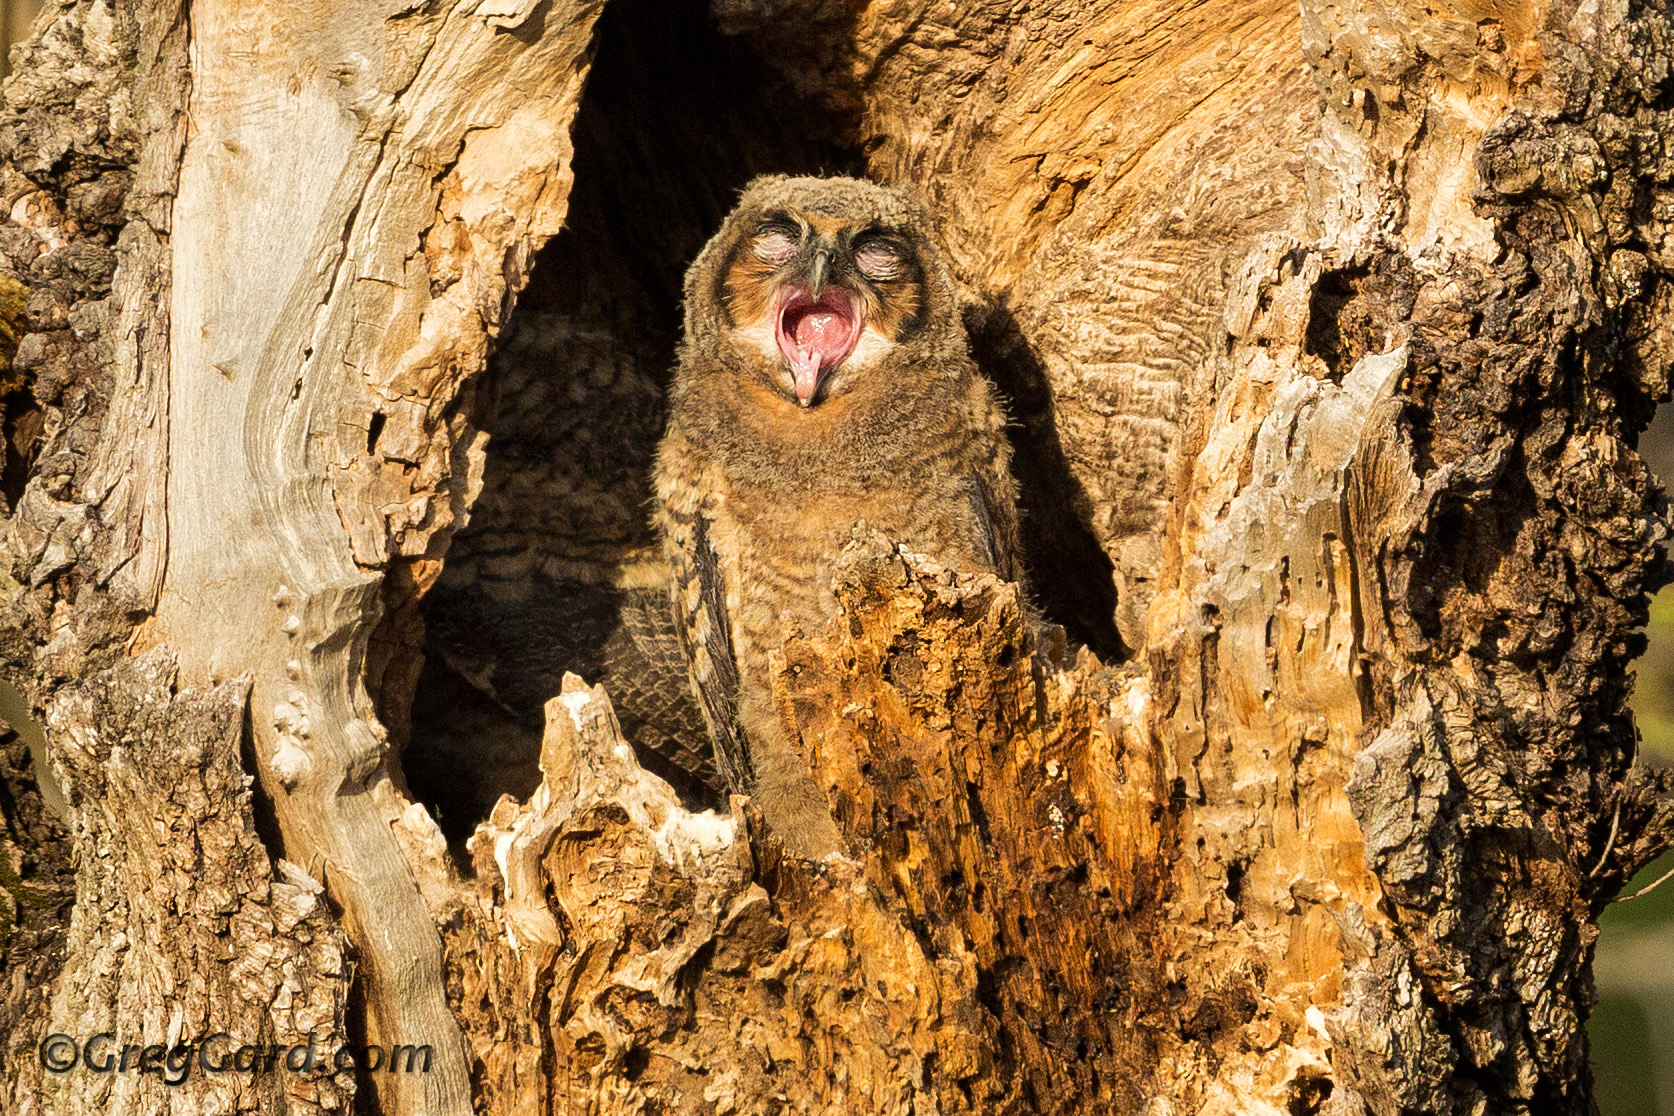 Great Horned Owlet yawning